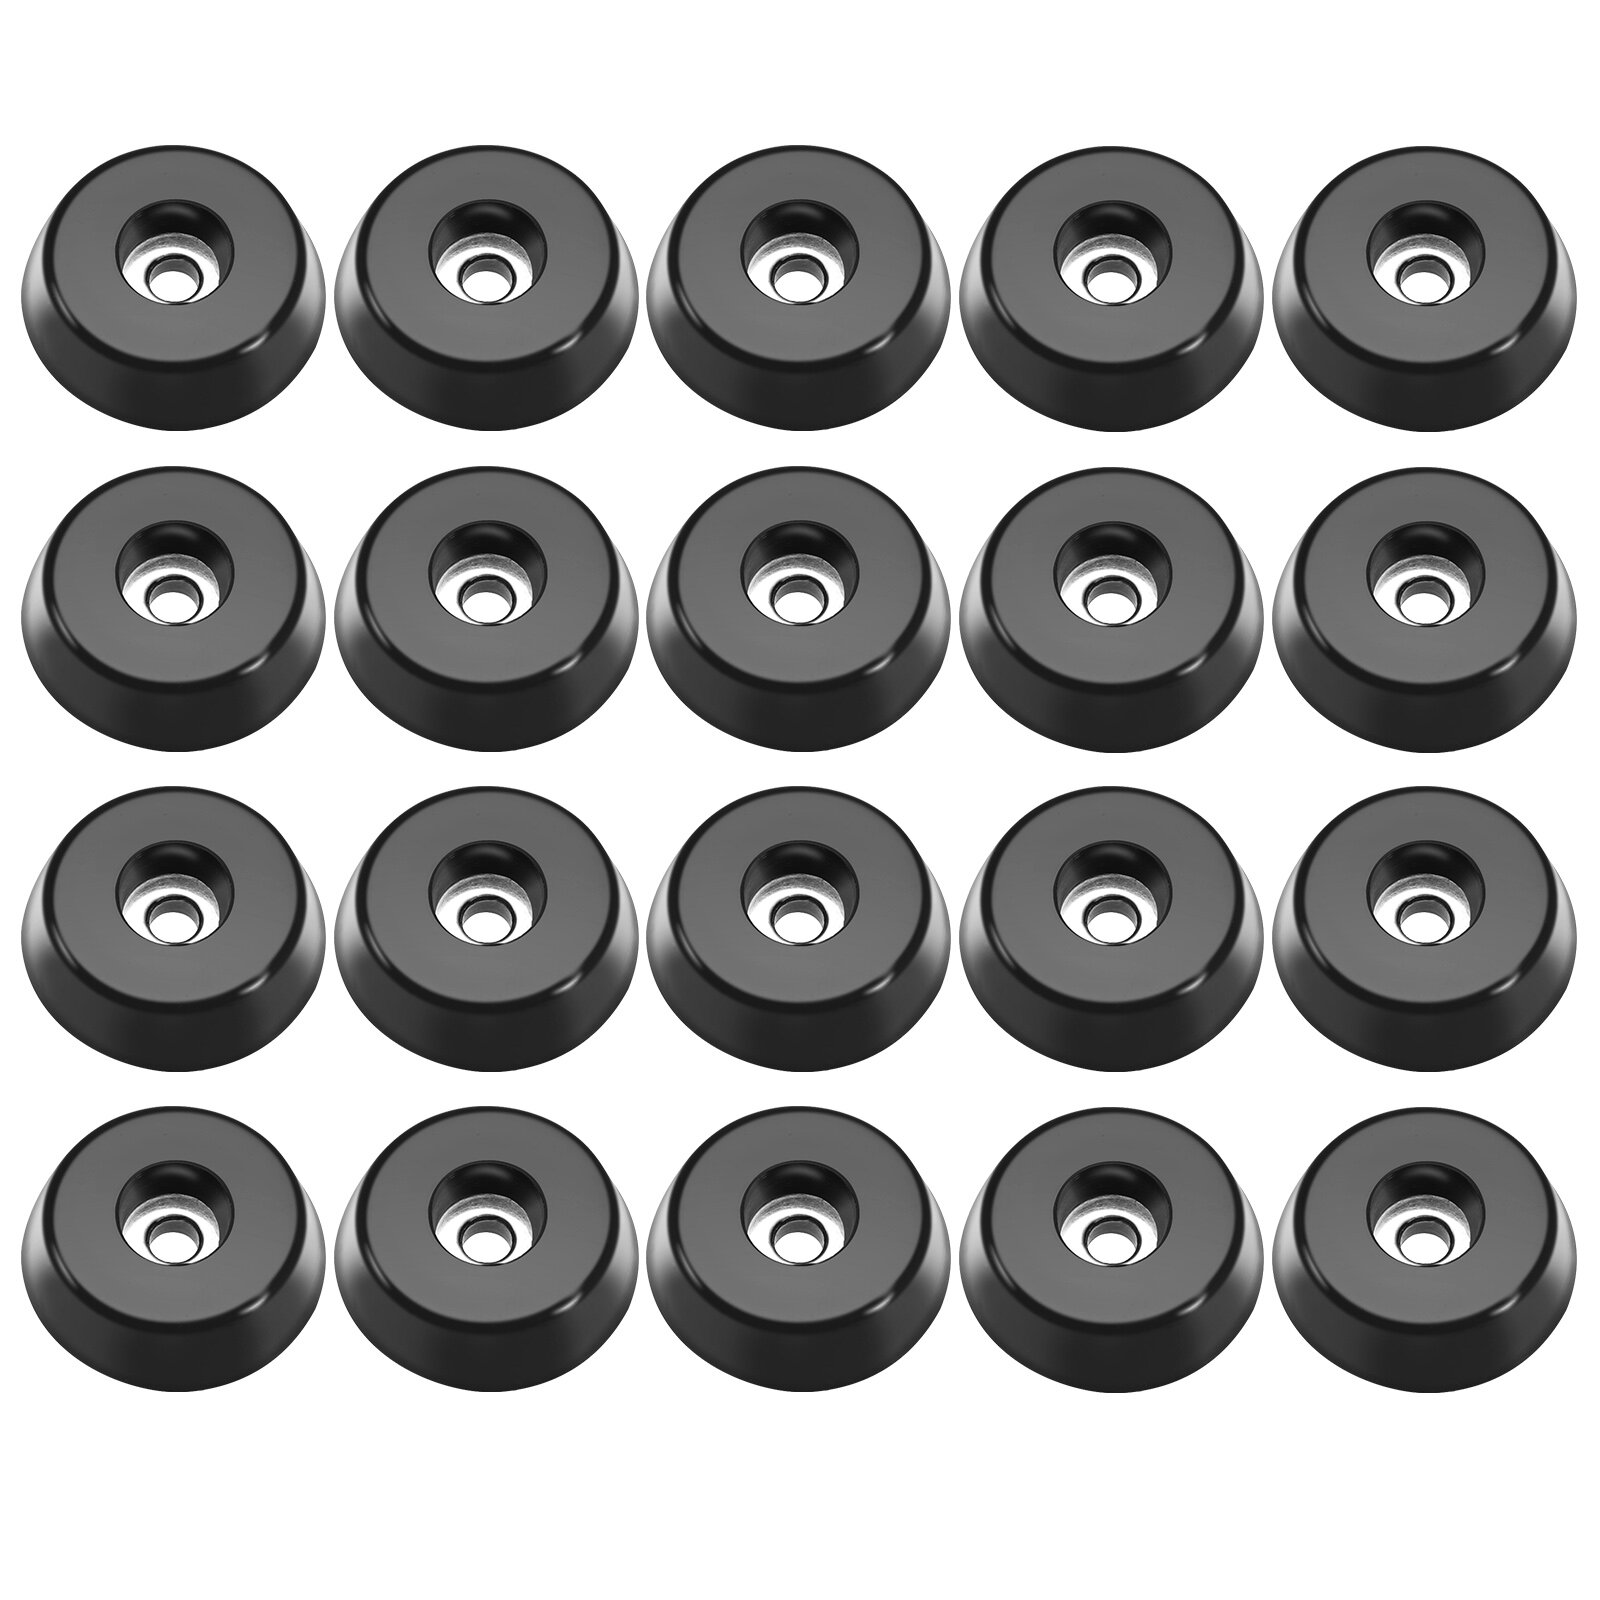 20x Rubber Feet Round Bumper Furniture Table Printer Floor Protector D18x15xH5mm